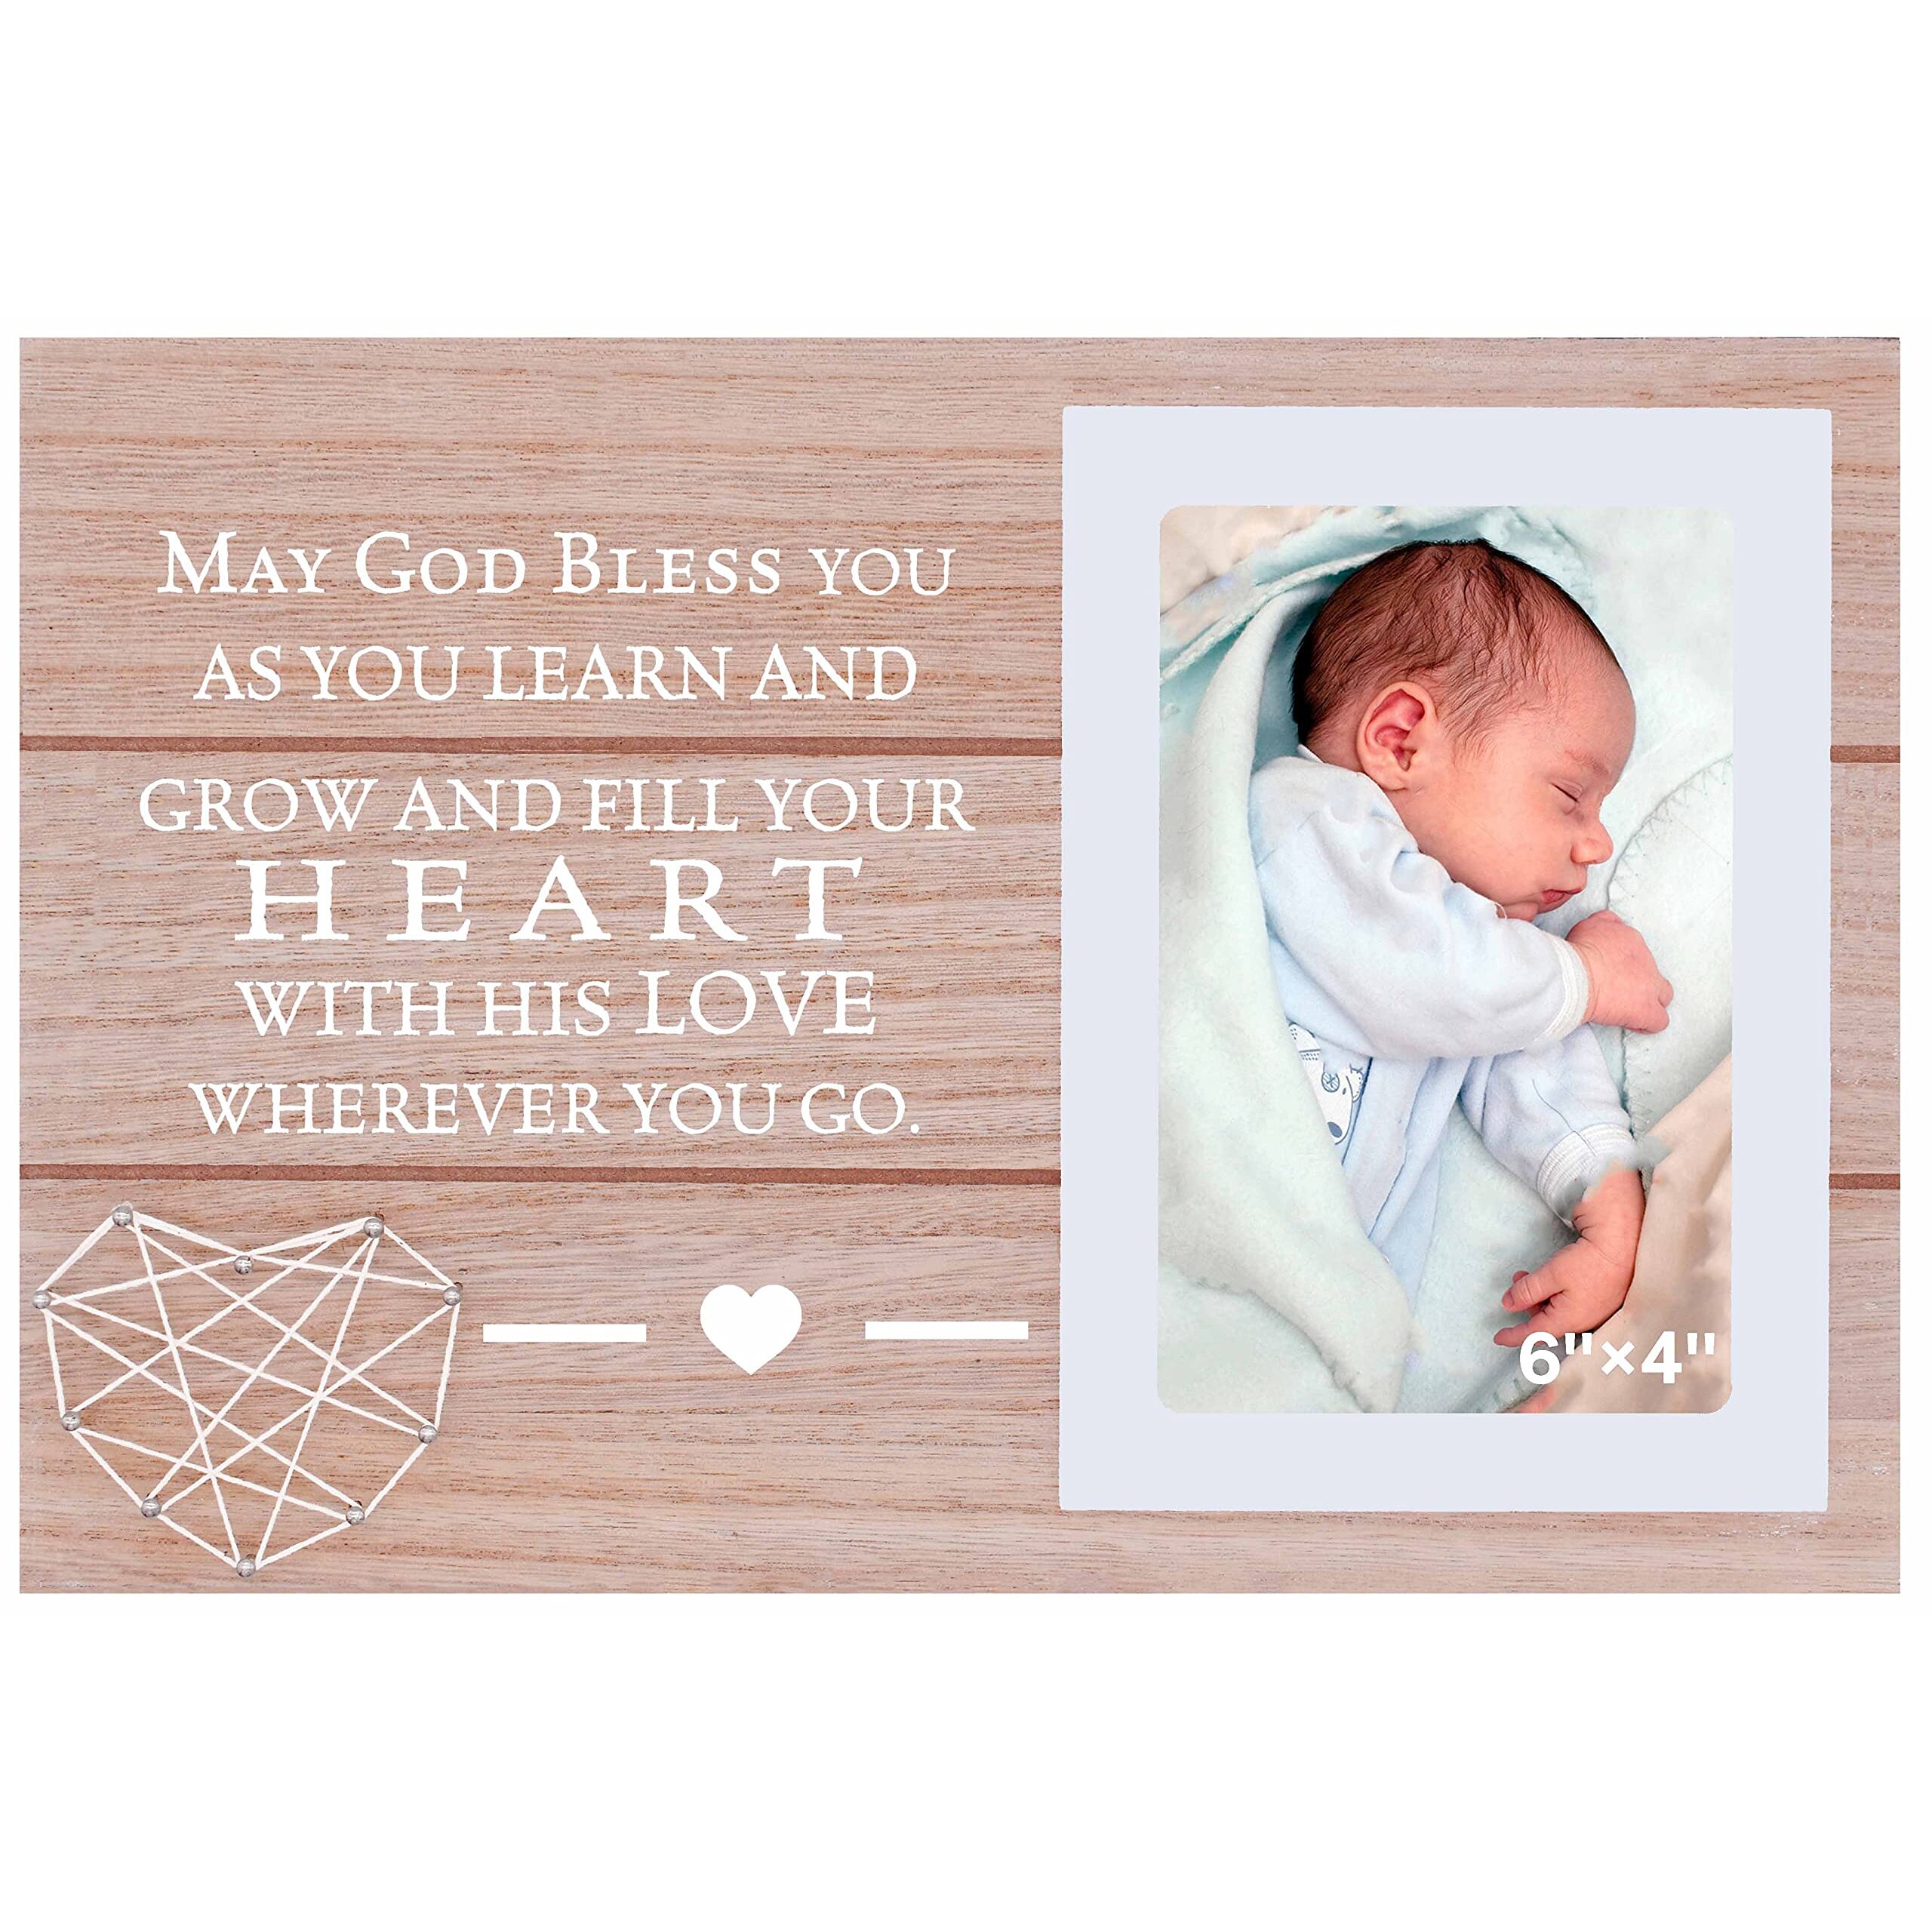 Baptism Picture Frame gift for godchild - May god Bless You as You Learn and grow - christening Keepsake Photo Frame gift - Unique Milestones Dedicati